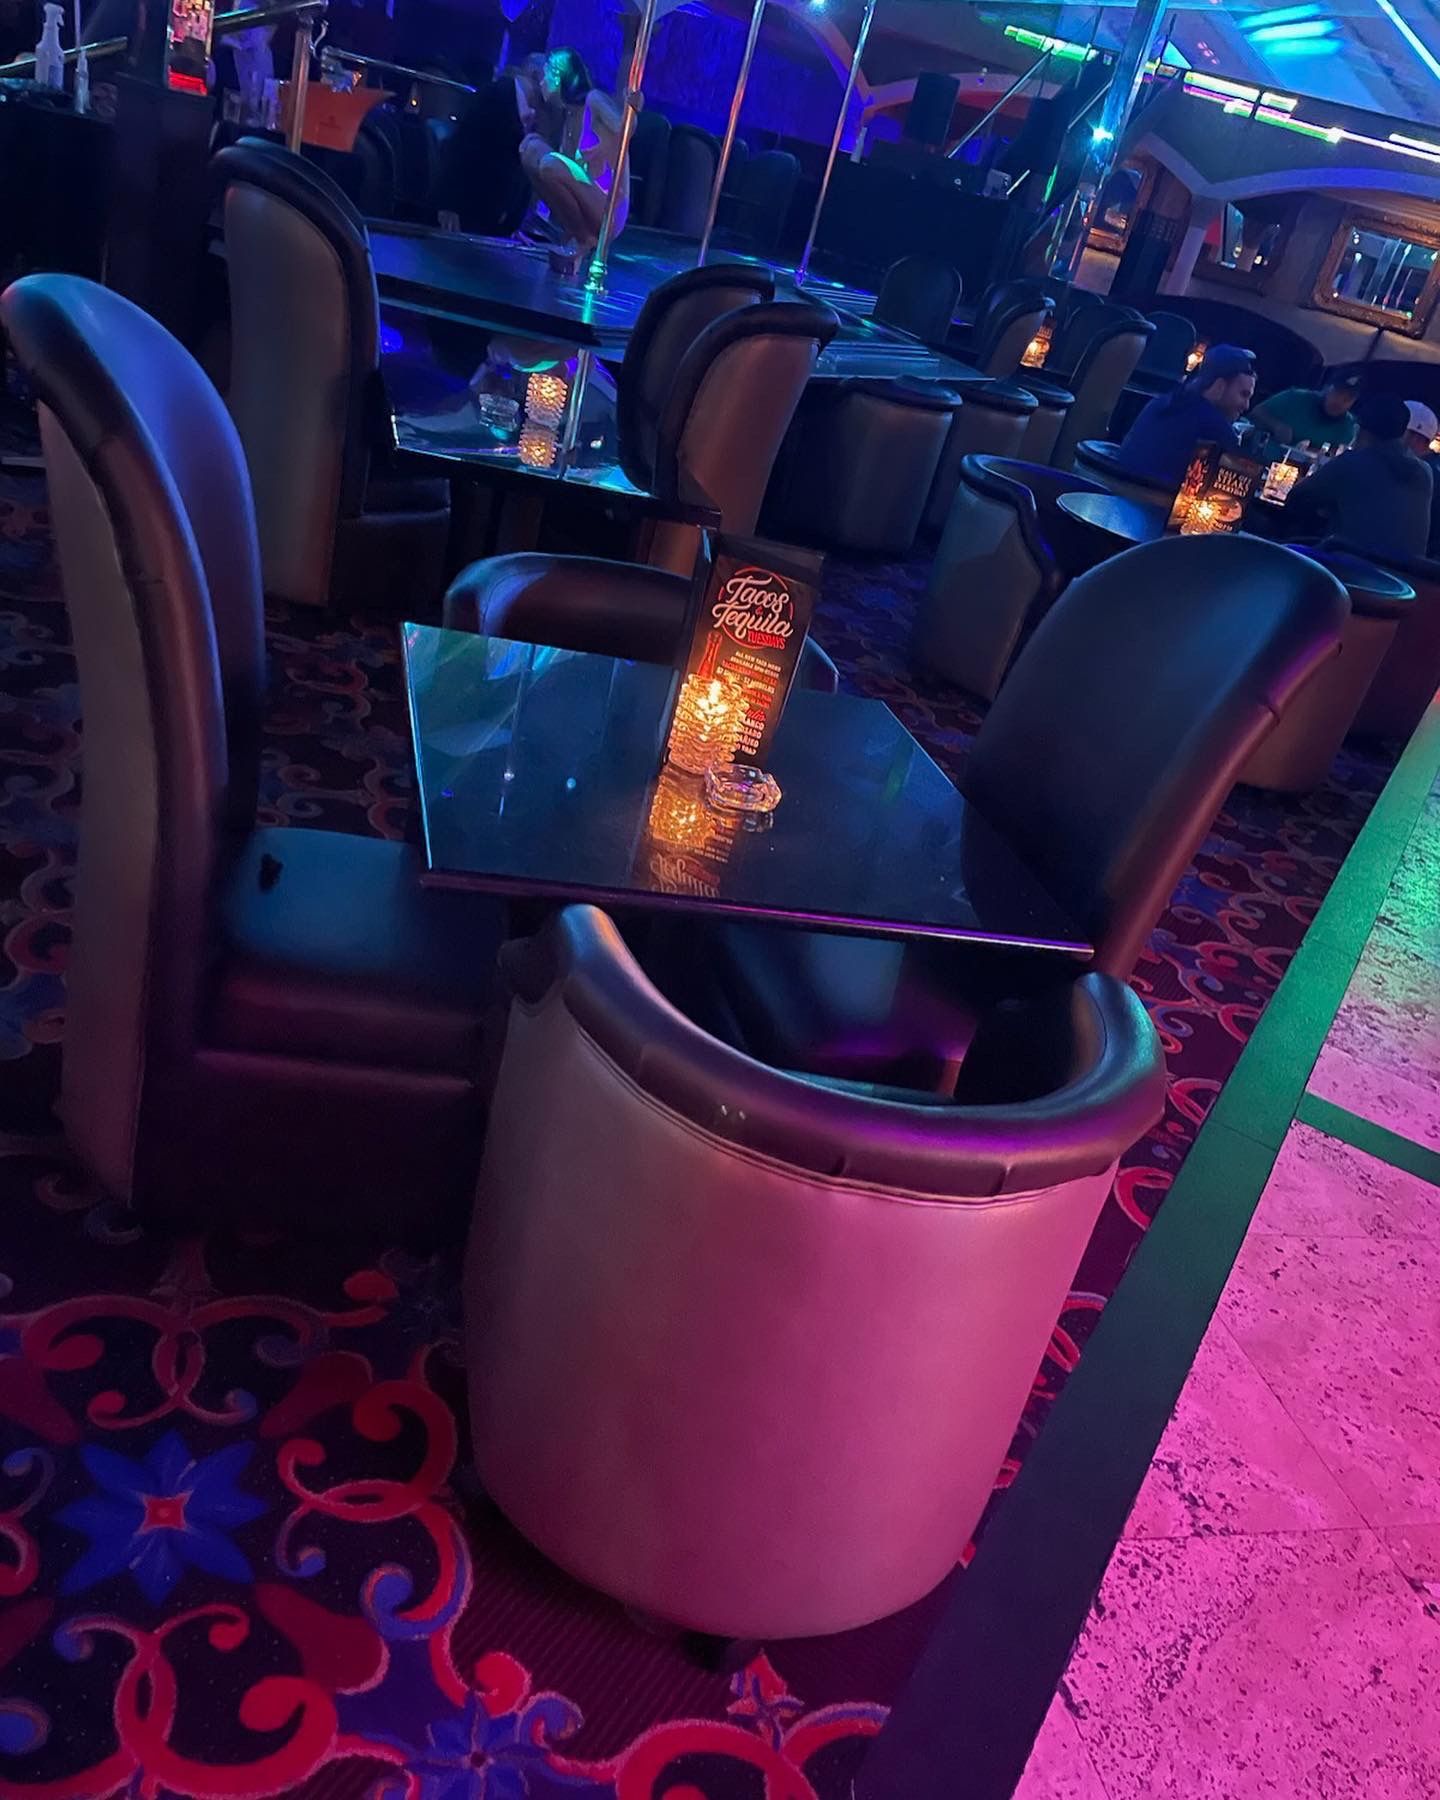 nightclub table with dining chairs